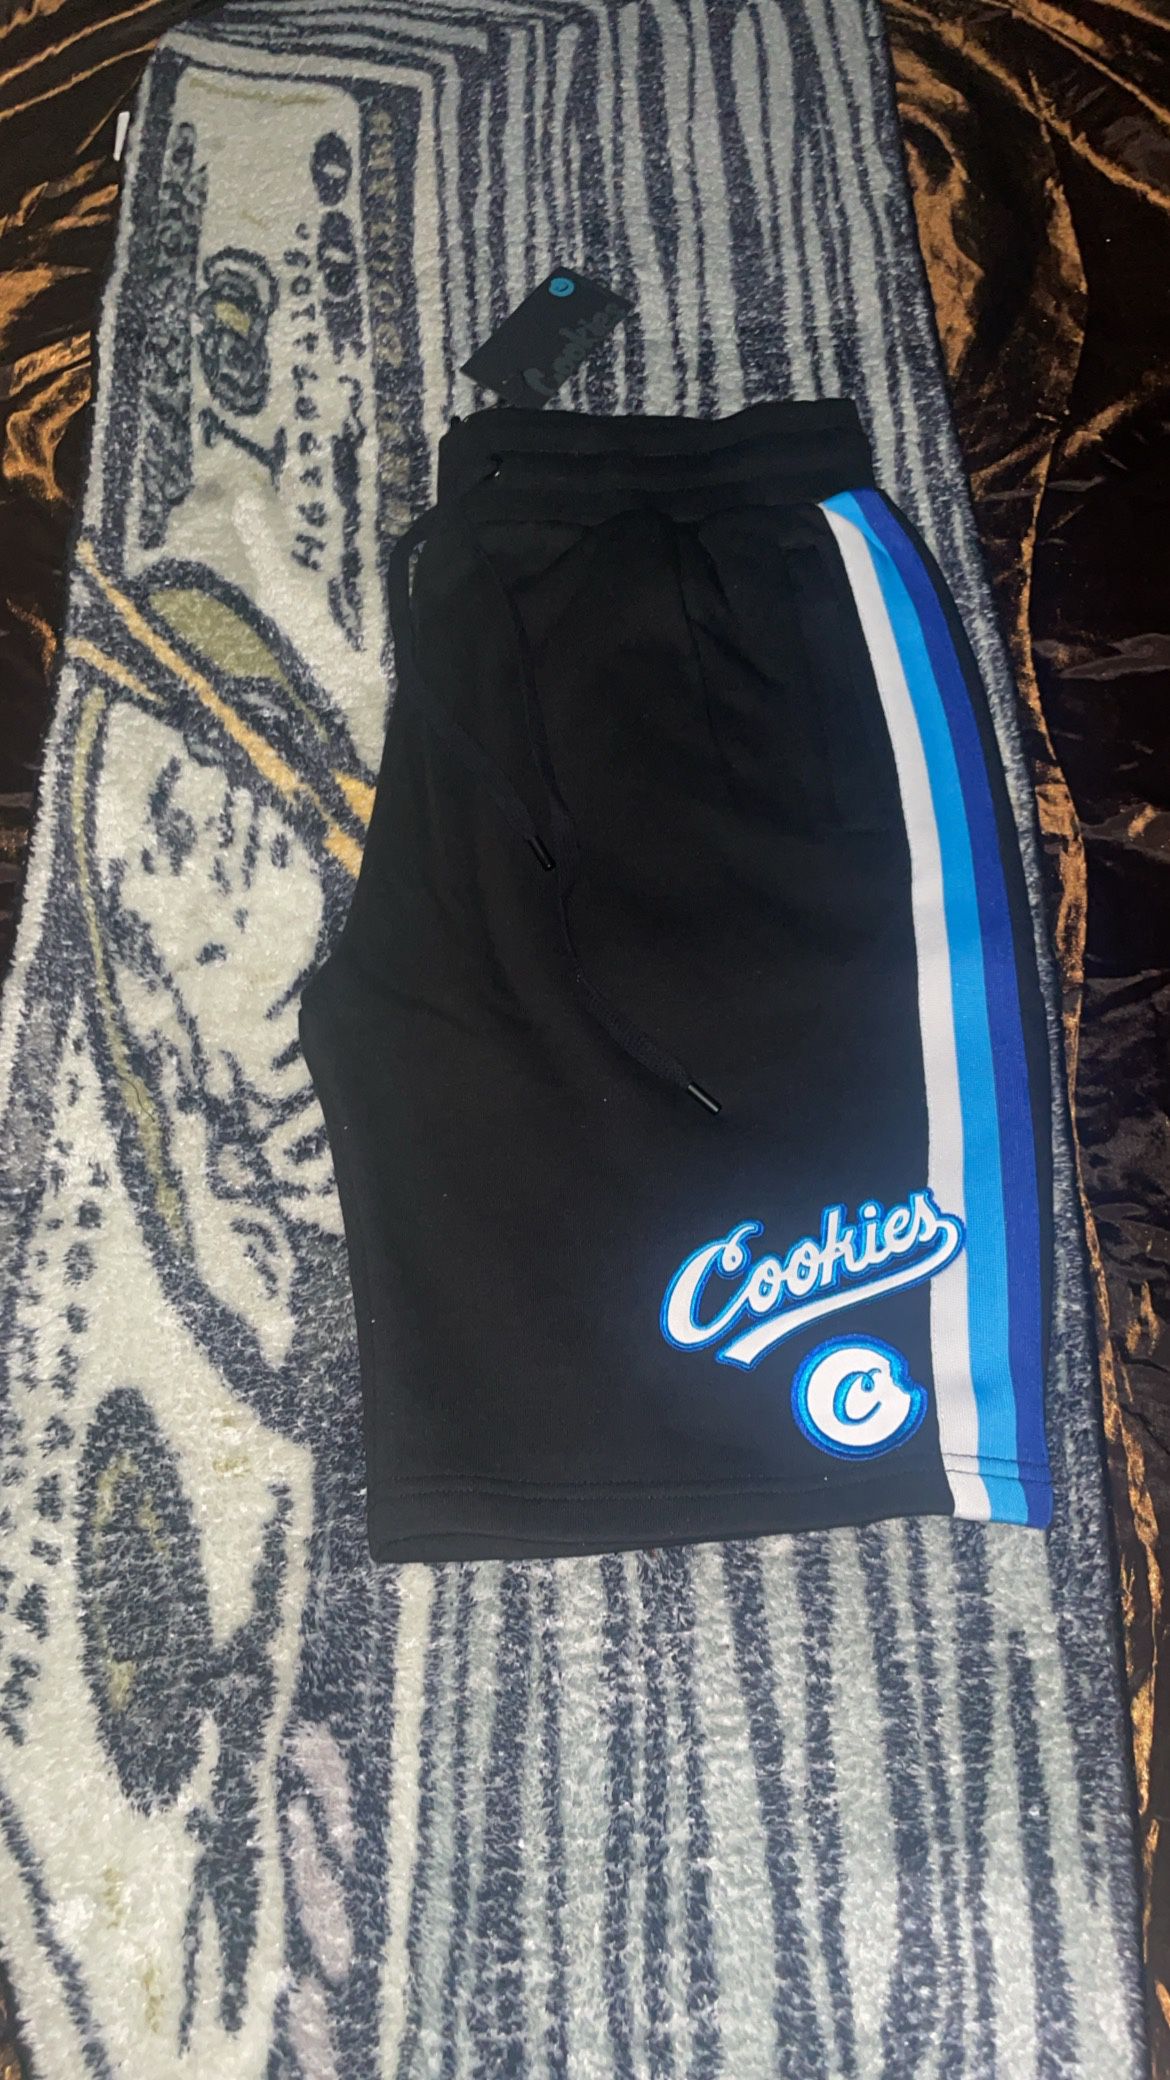 Cookies “Shorts”